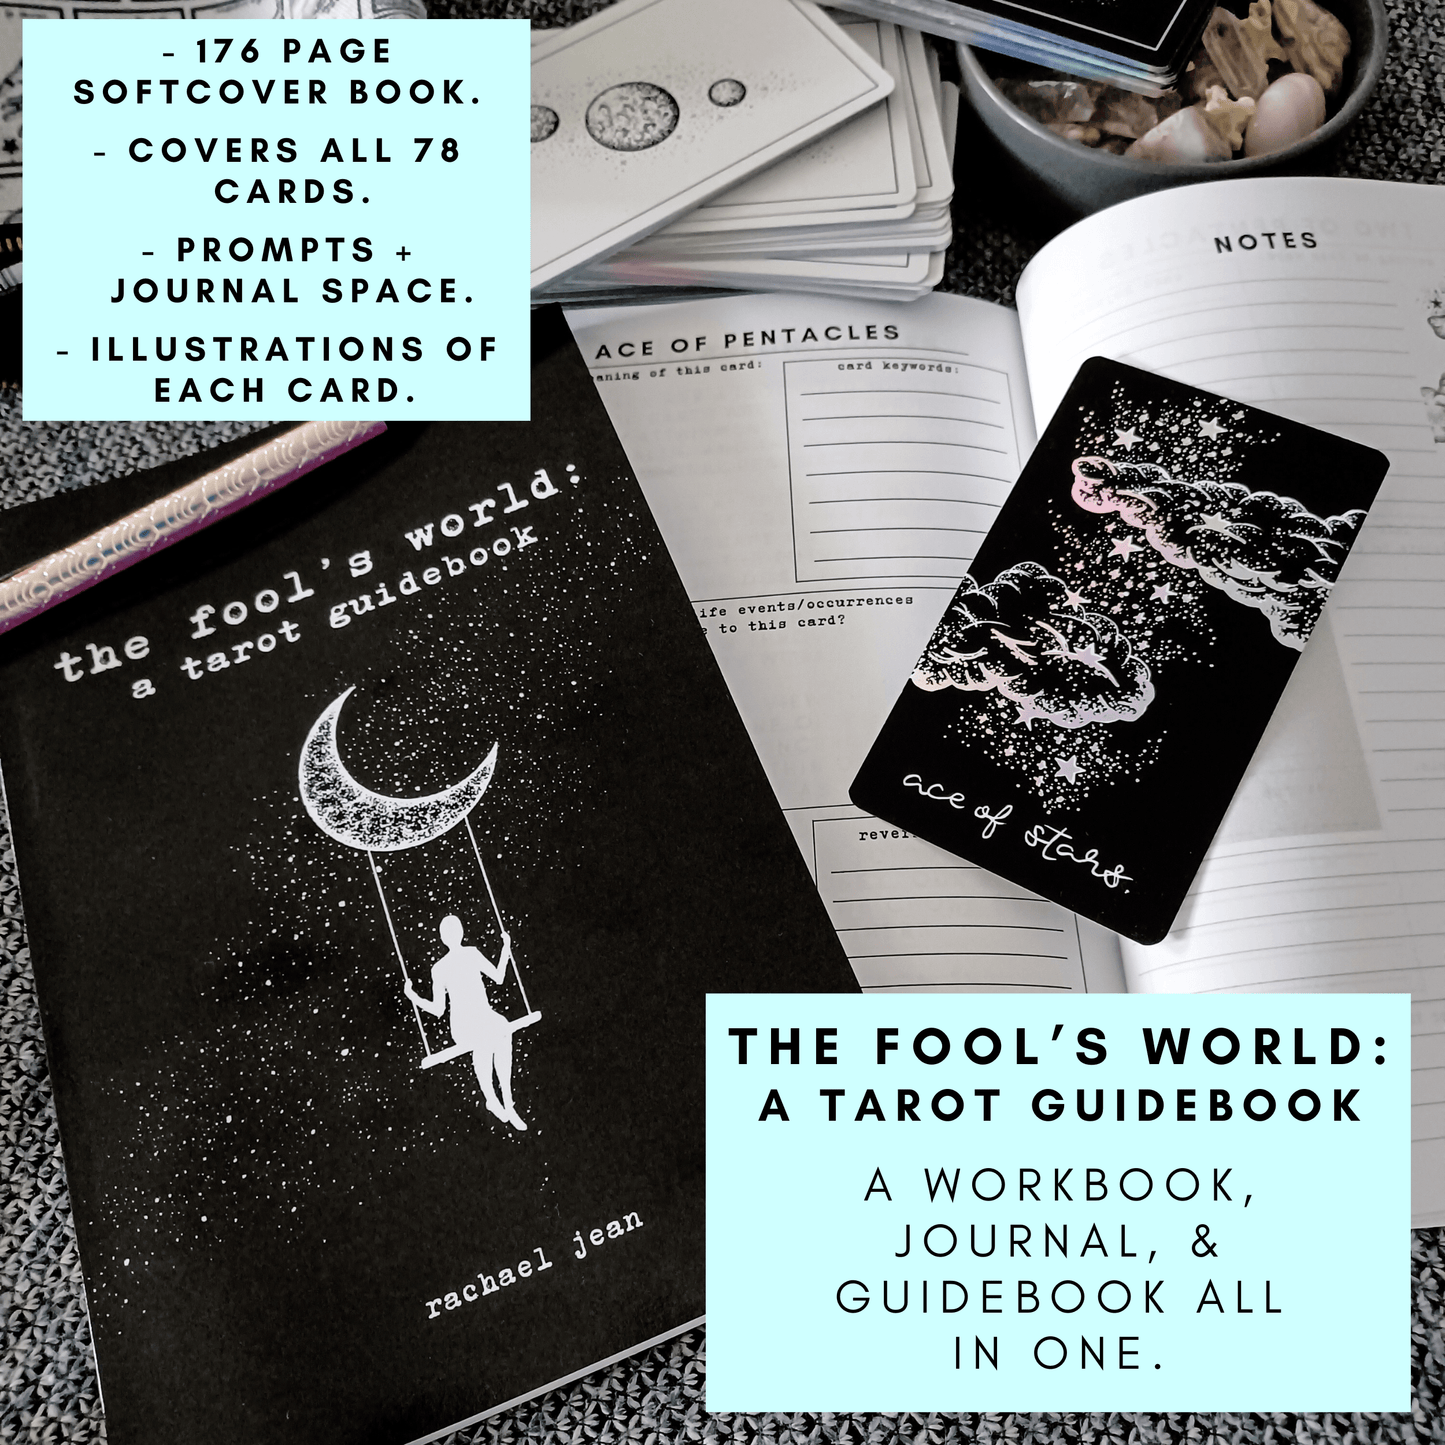 tarot card workbook: a guidebook journal (softcover) - The Wandering Moon Co.